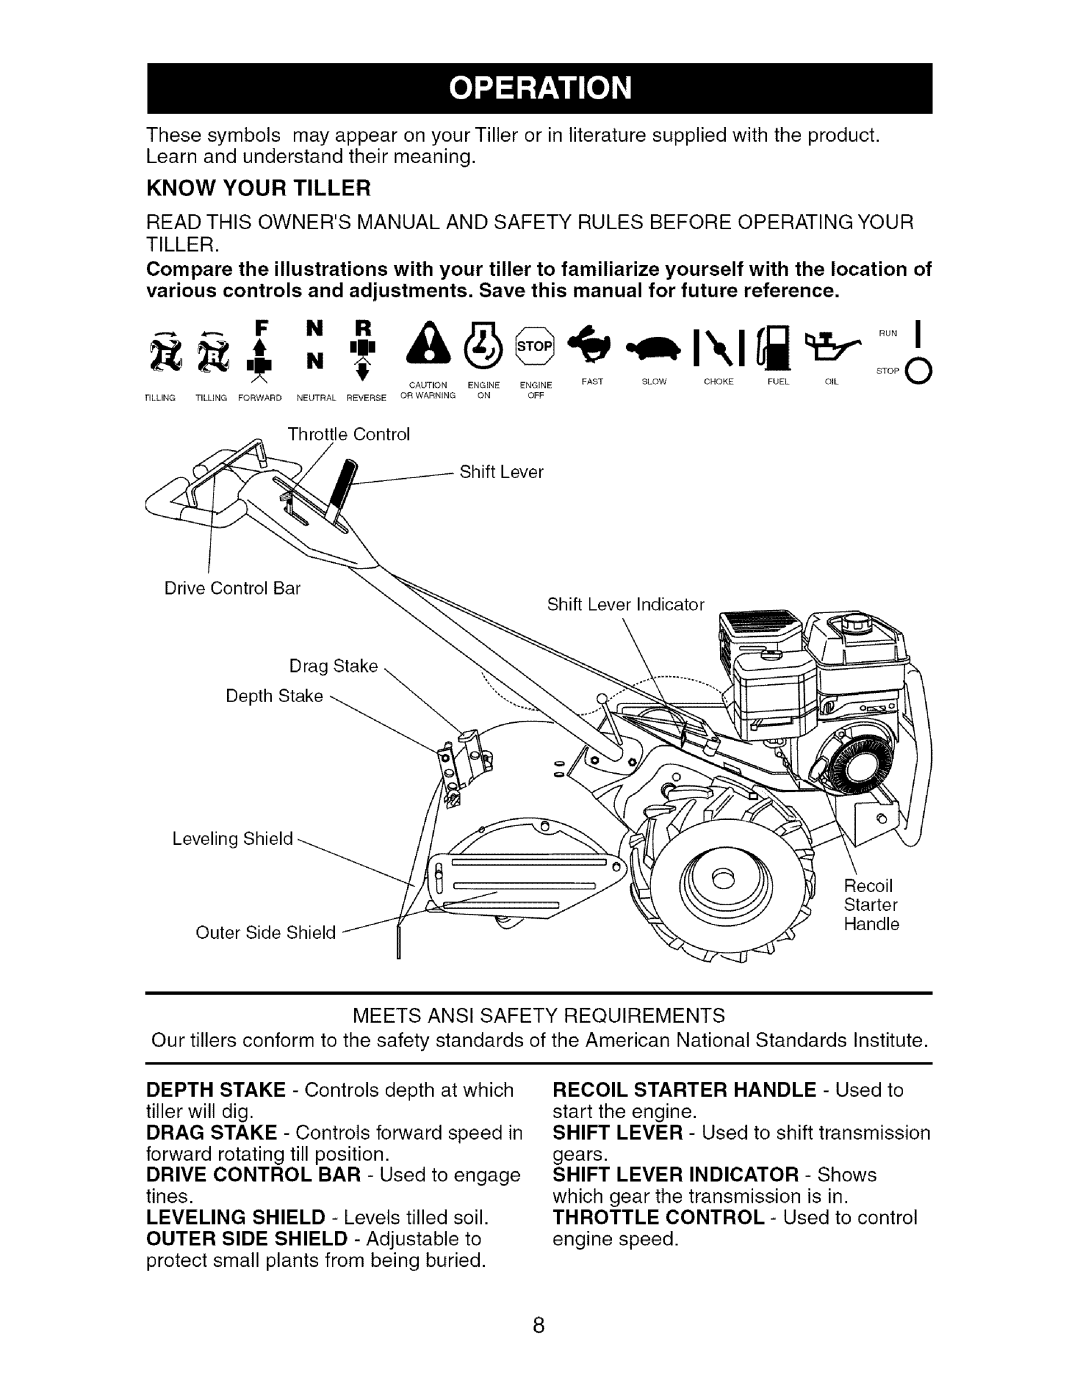 Craftsman 917.29604 owner manual Know Your Tiller, Meets Ansi Safety Requirements 